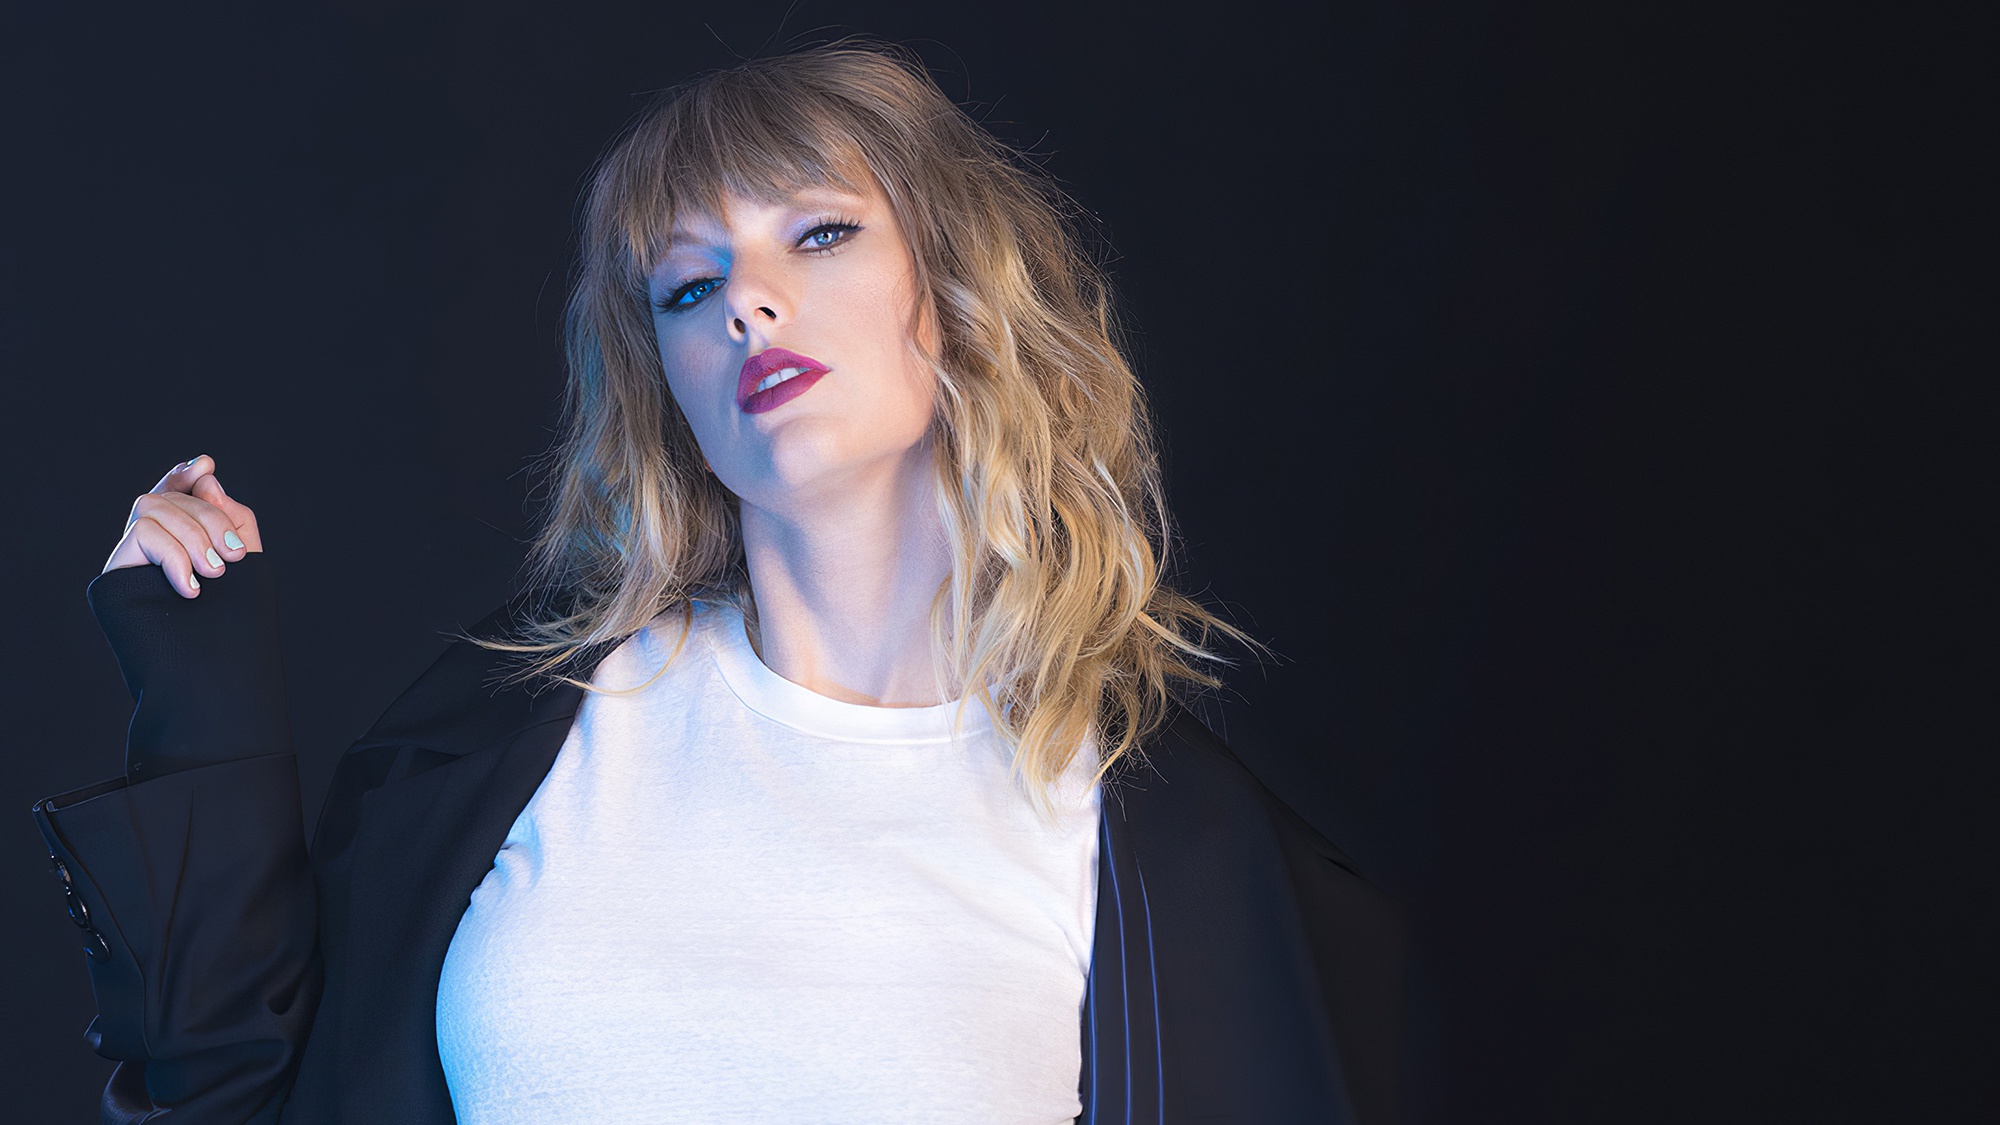 People 2000x1125 white shirt black coat open mouth makeup open coat bright looking at viewer blue eyes black background blonde wavy hair singer songwriters celebrity women Taylor Swift